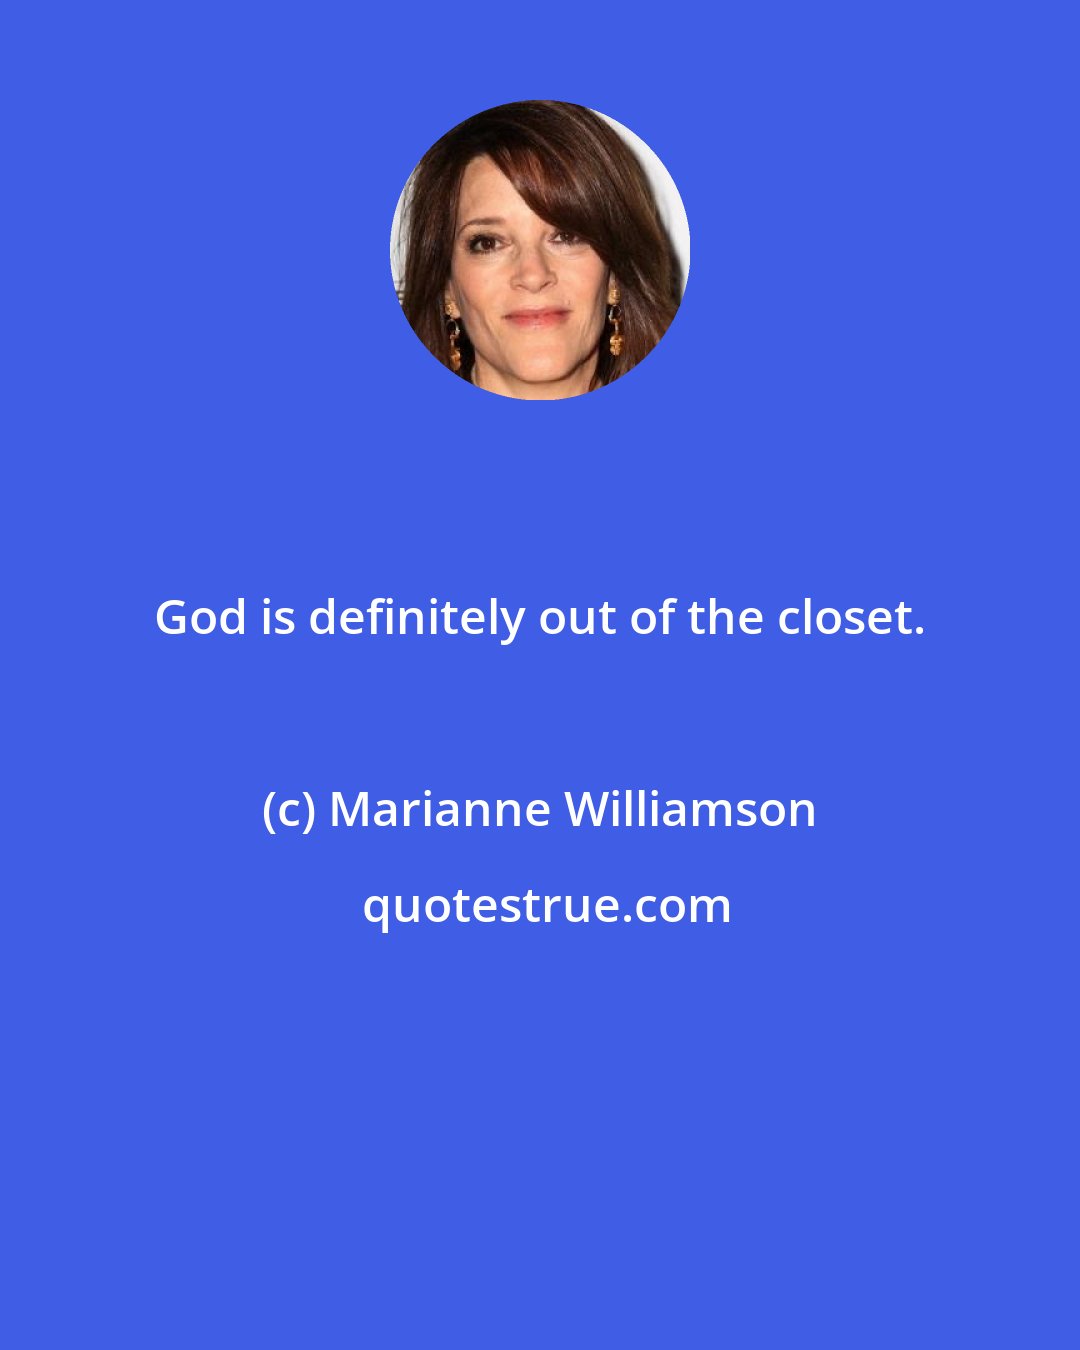 Marianne Williamson: God is definitely out of the closet.